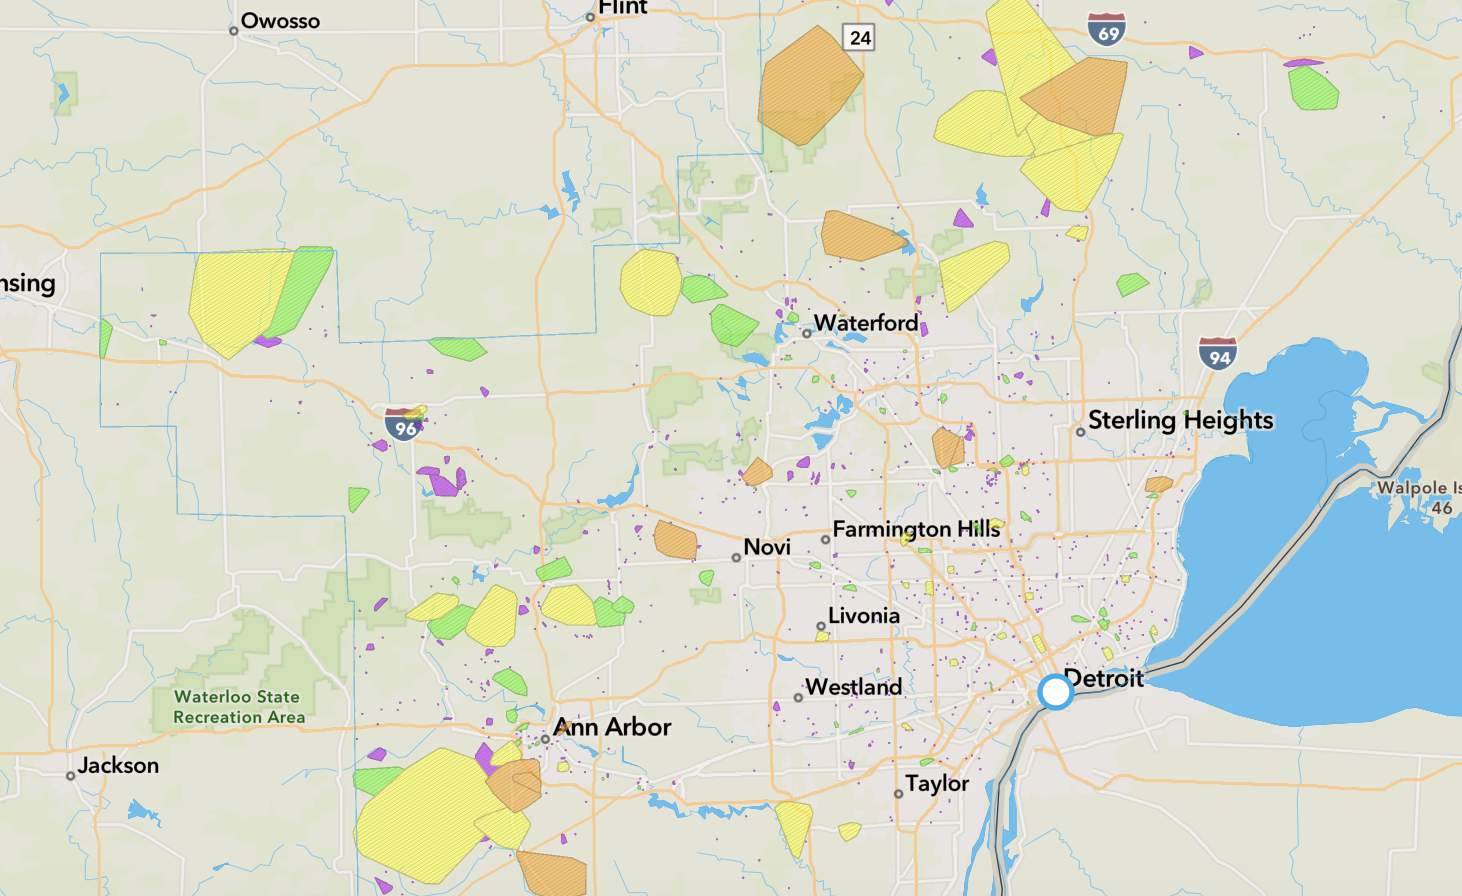 Michigan power outages: More than 200K remain without power after severe storms